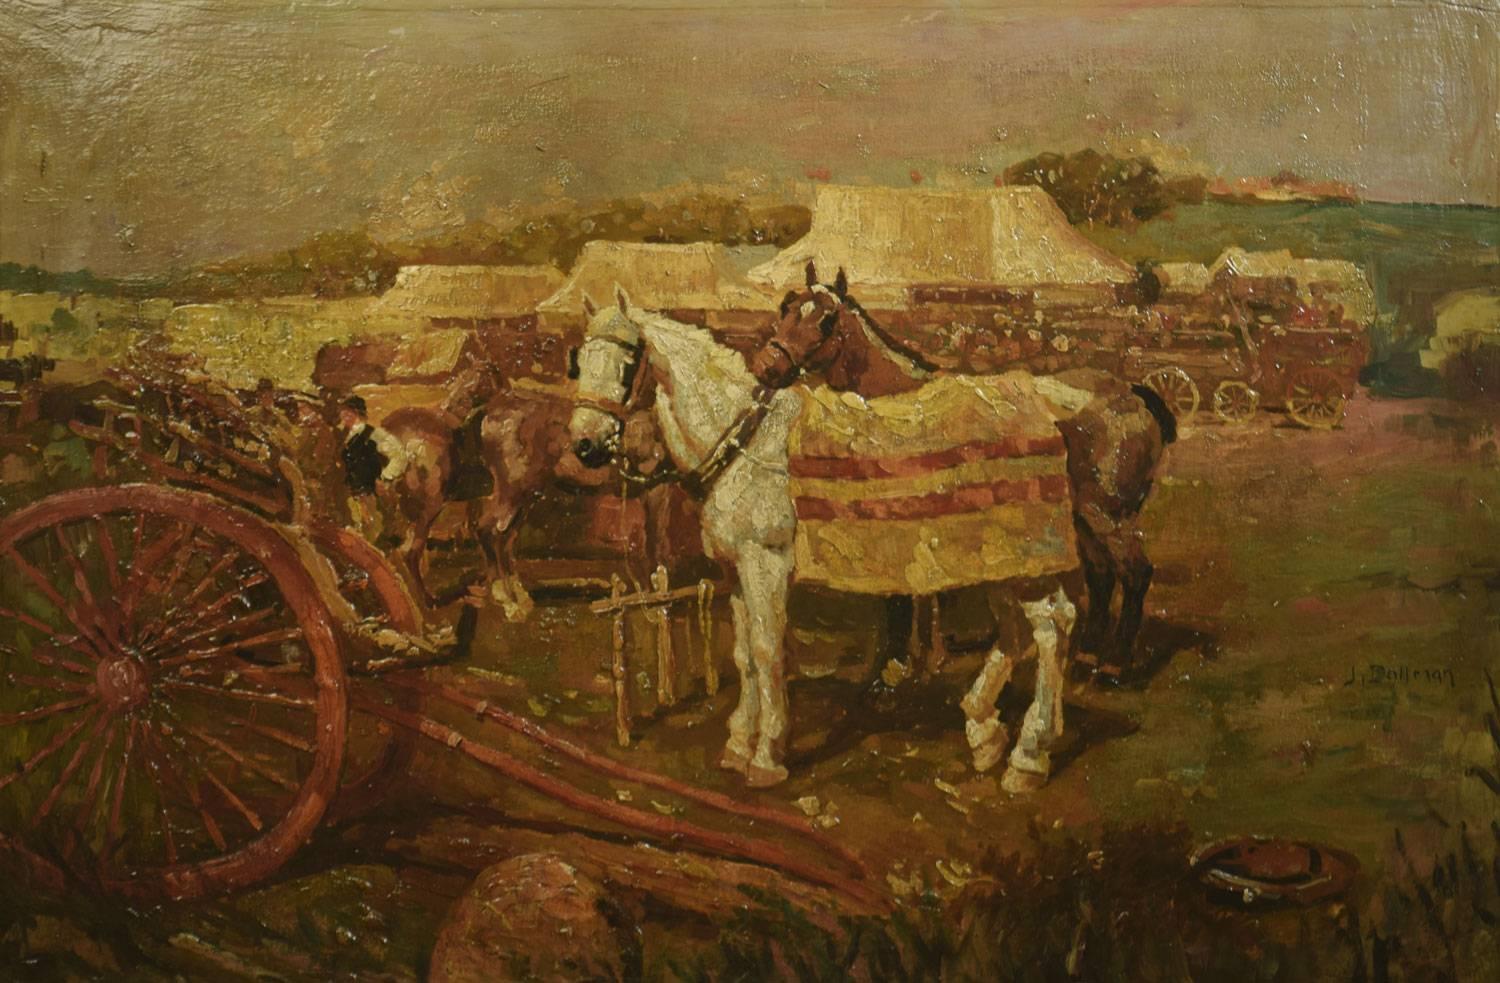 J Dollman, Edwardian English school, oil on canvas – depicting a horse Fair, signed, in gilt frame.
Dimensions:
Height 26.5 inches
Width 36.5 inches
Depth 2 inches.